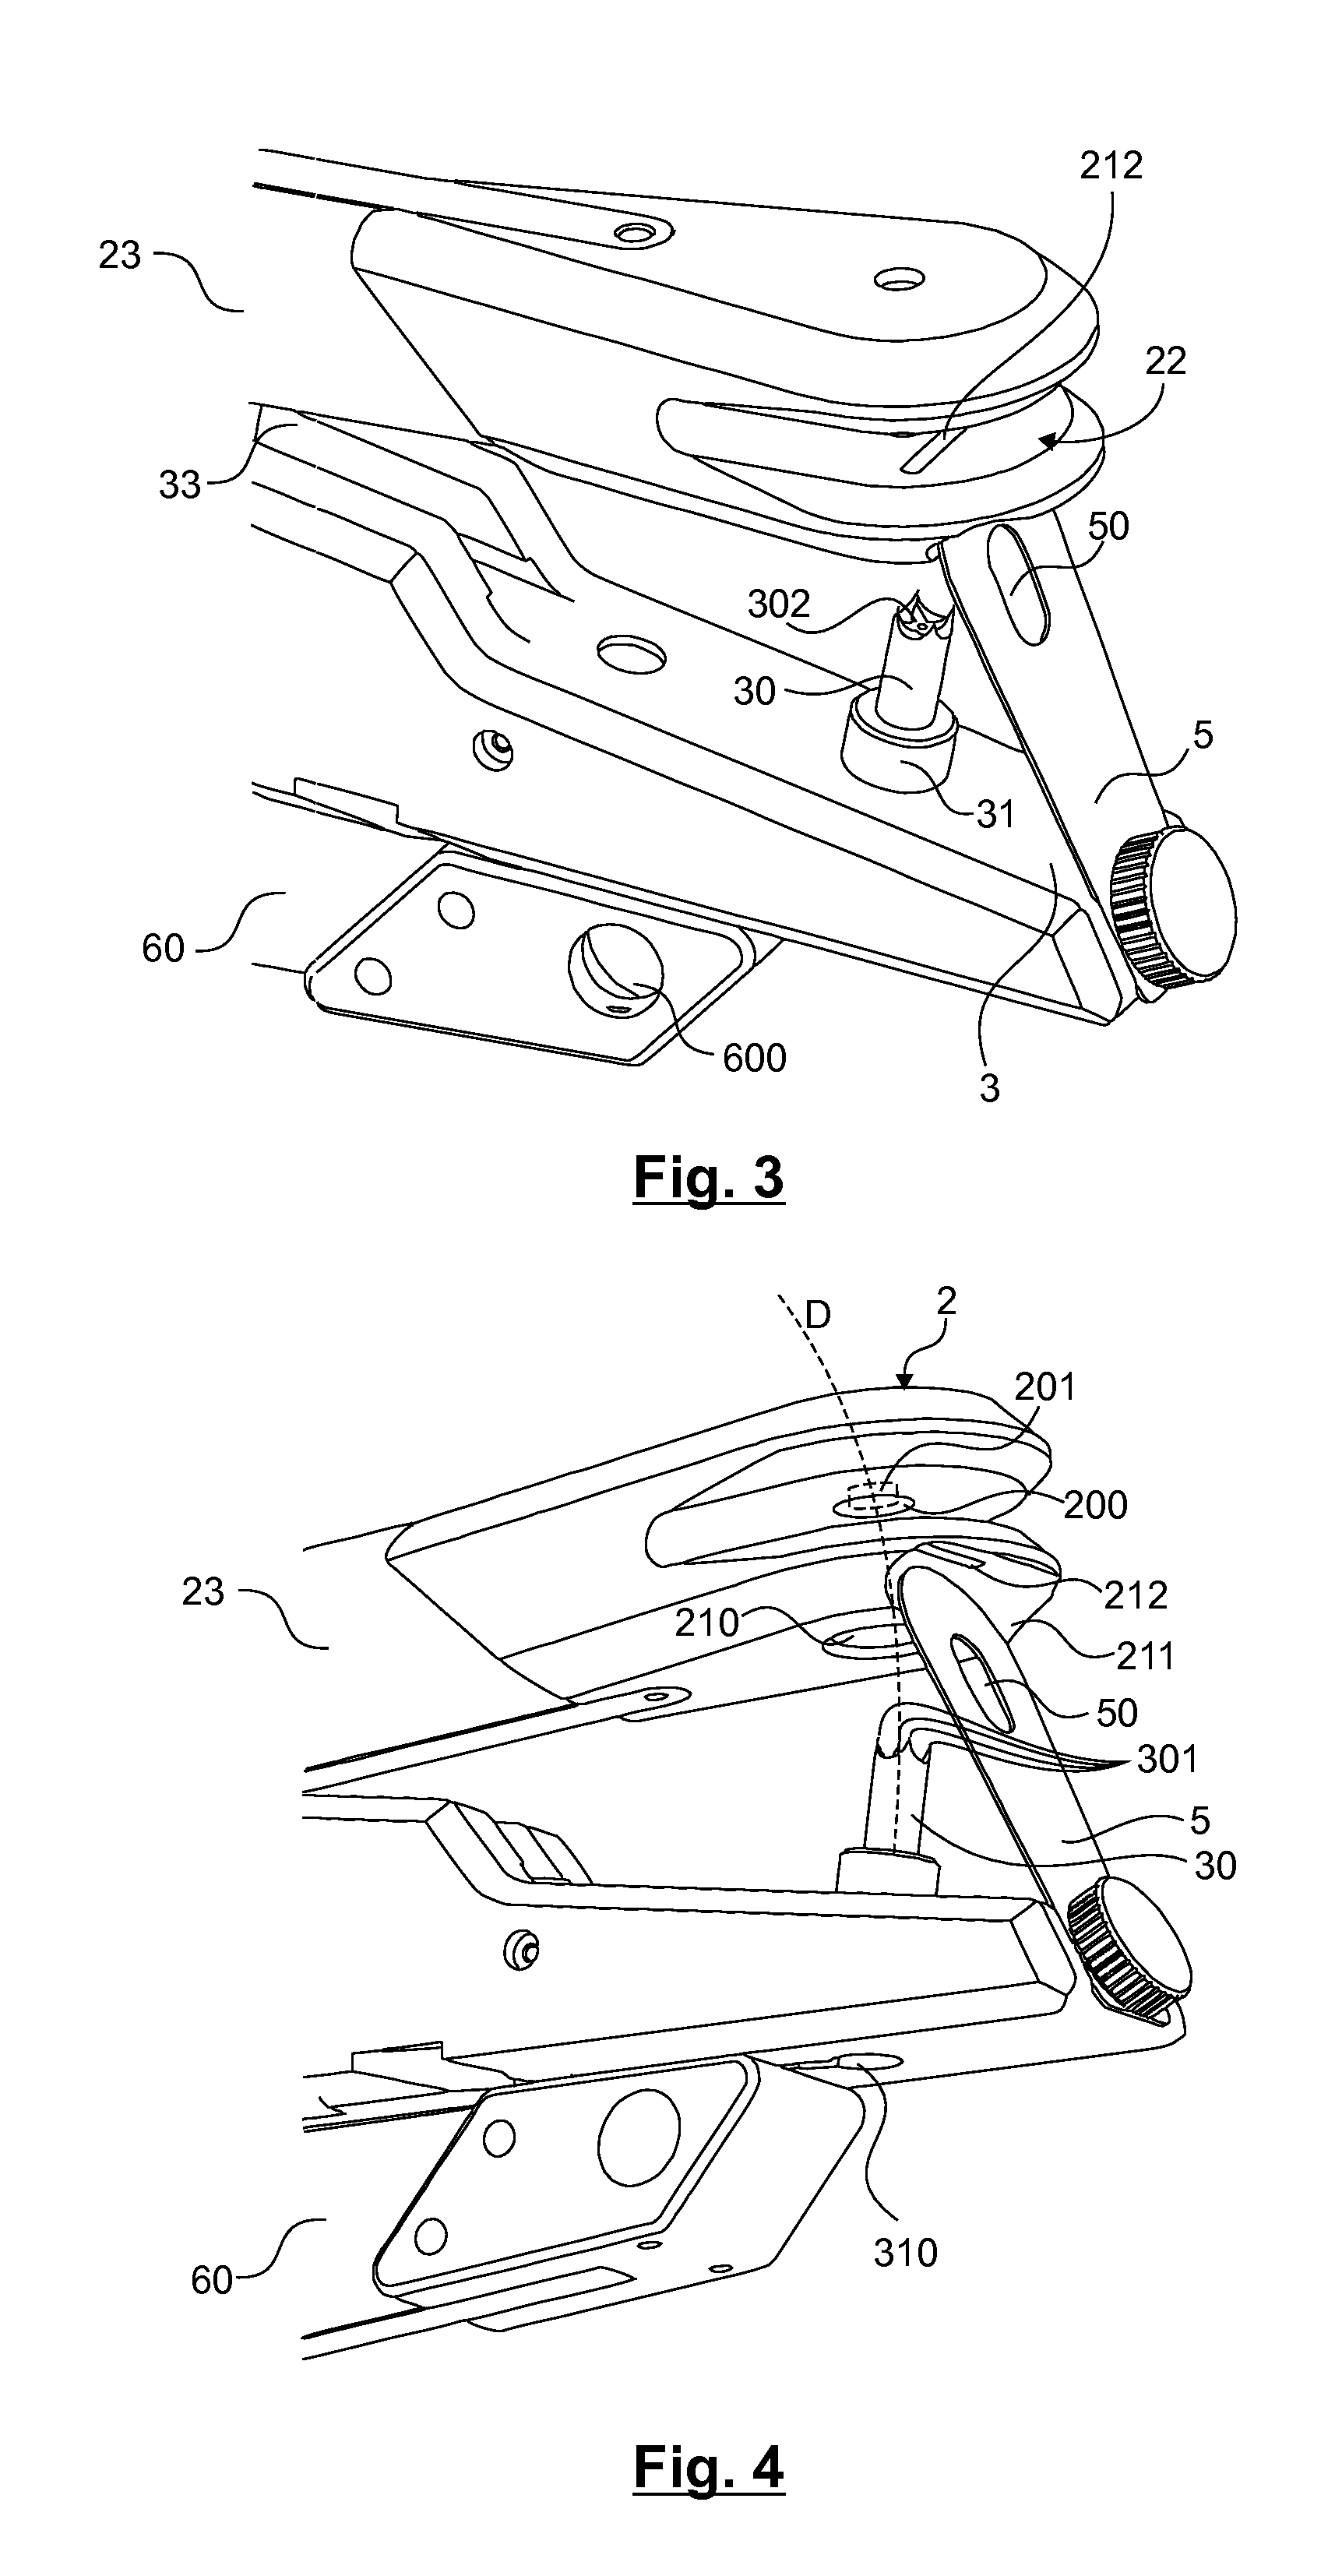 Device for inoculating a veterinary product into a poultry bird's wing